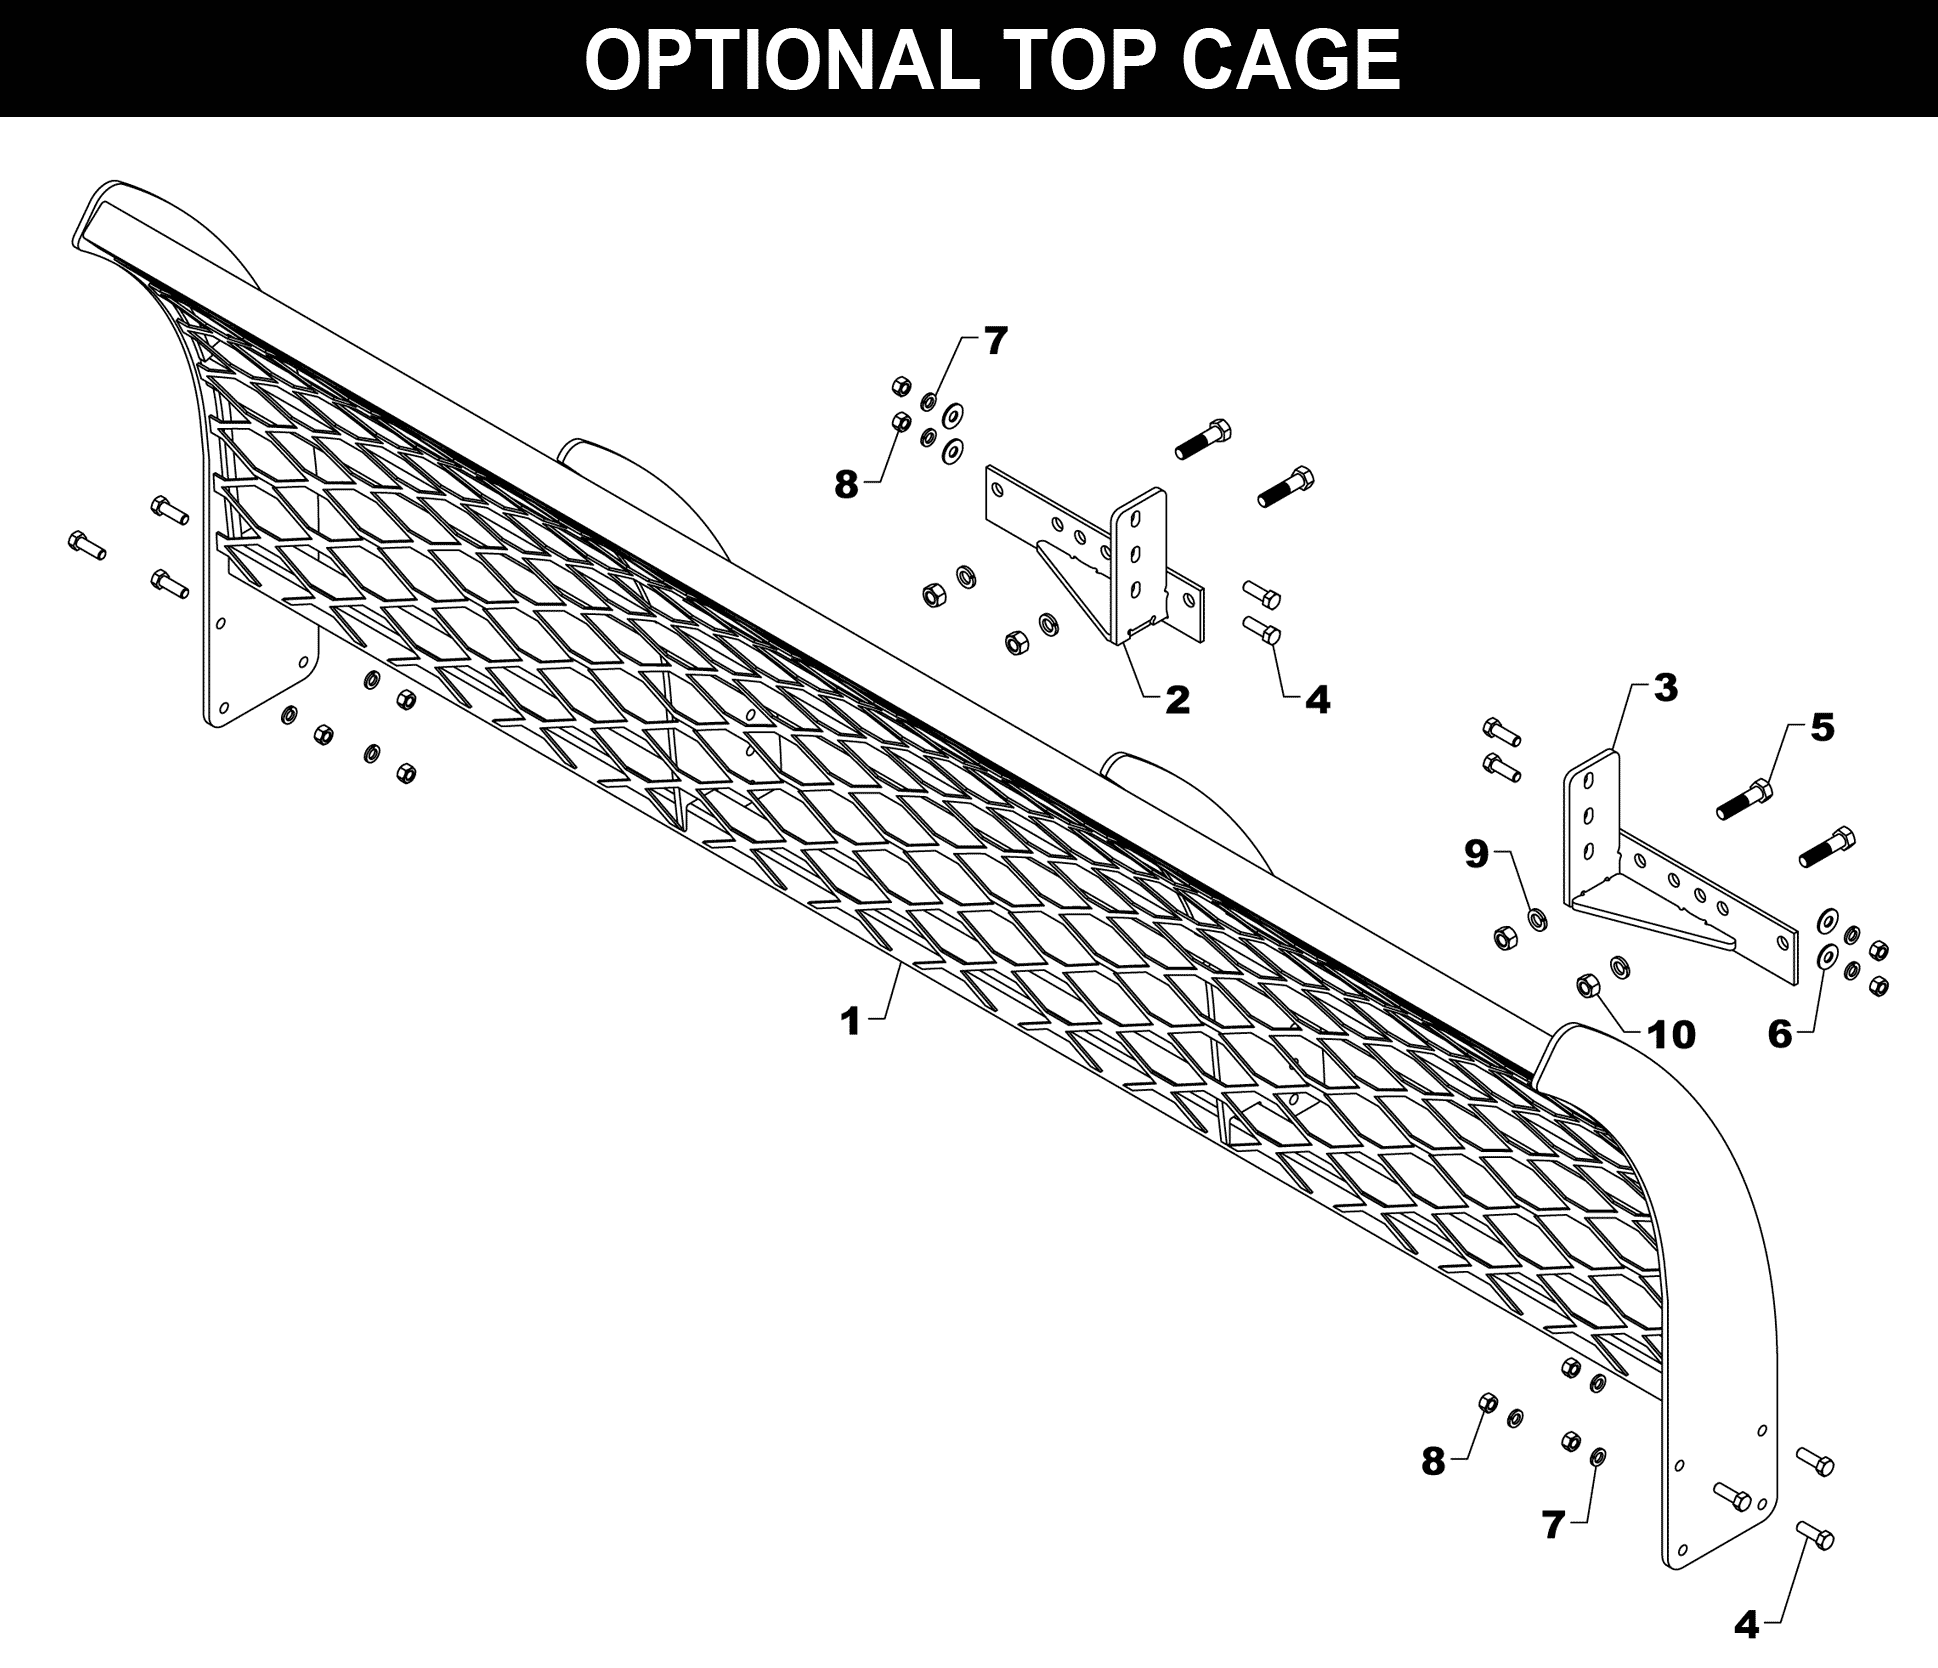 Top Cage